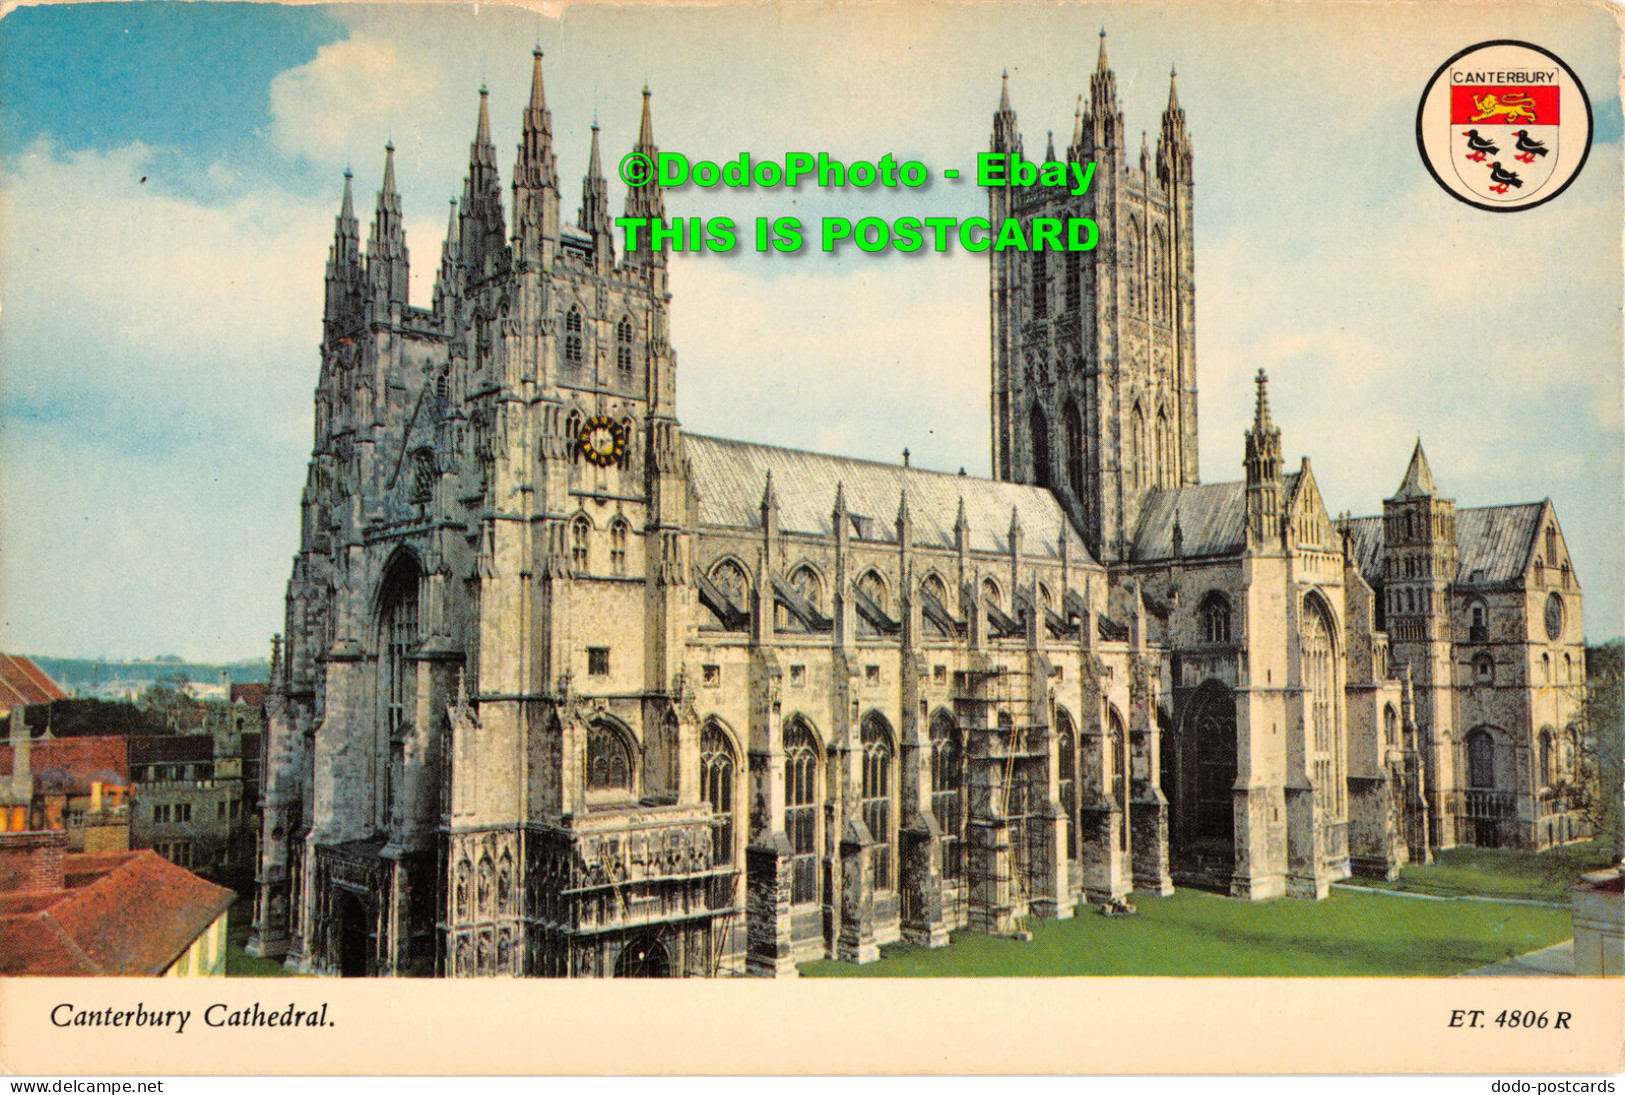 R354155 Canterbury Cathedral. ET. 4806 R. Elgate Postcards - World